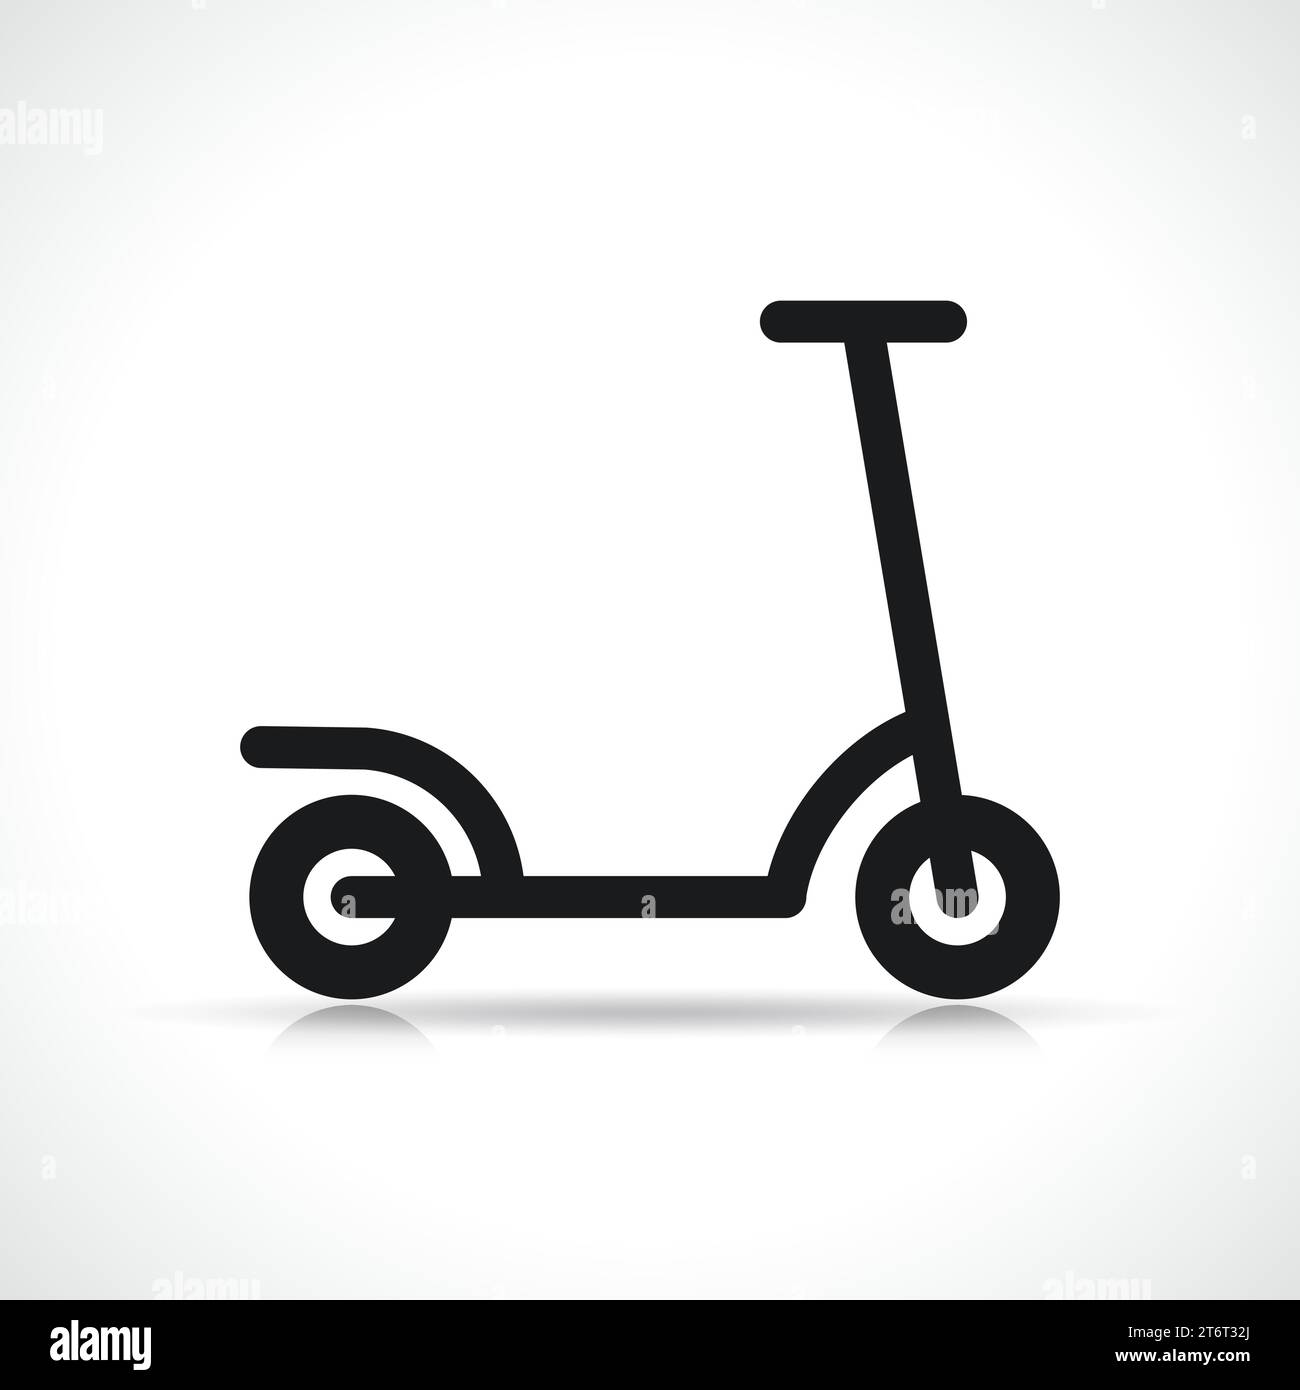 Illustration of electric scooter black icon isolated Stock Vector